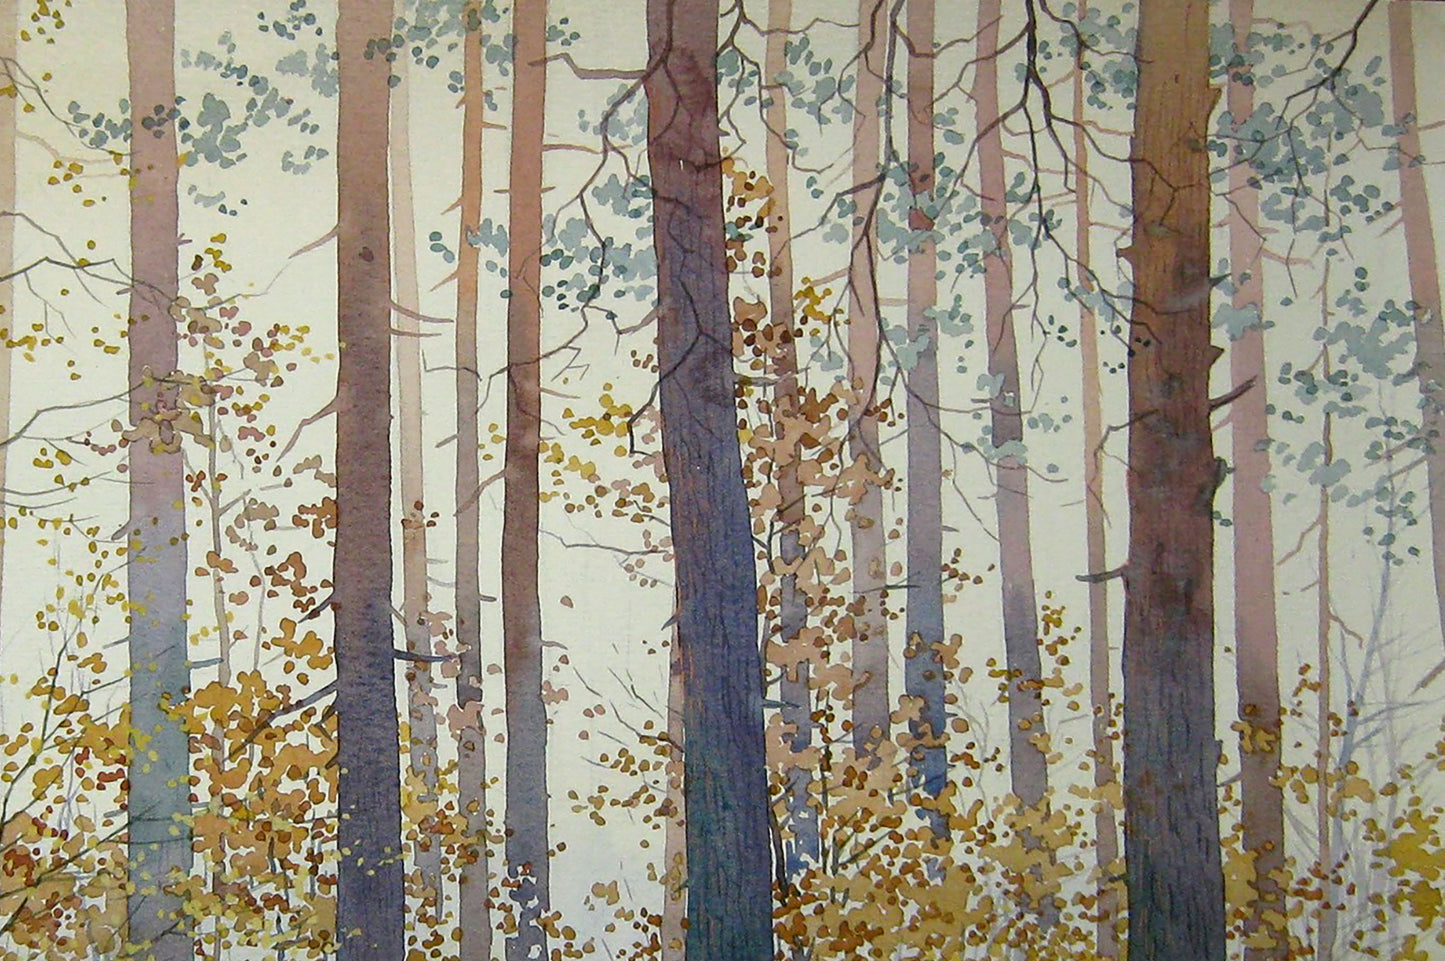 Watercolor painting Among the pines Savenets Valery